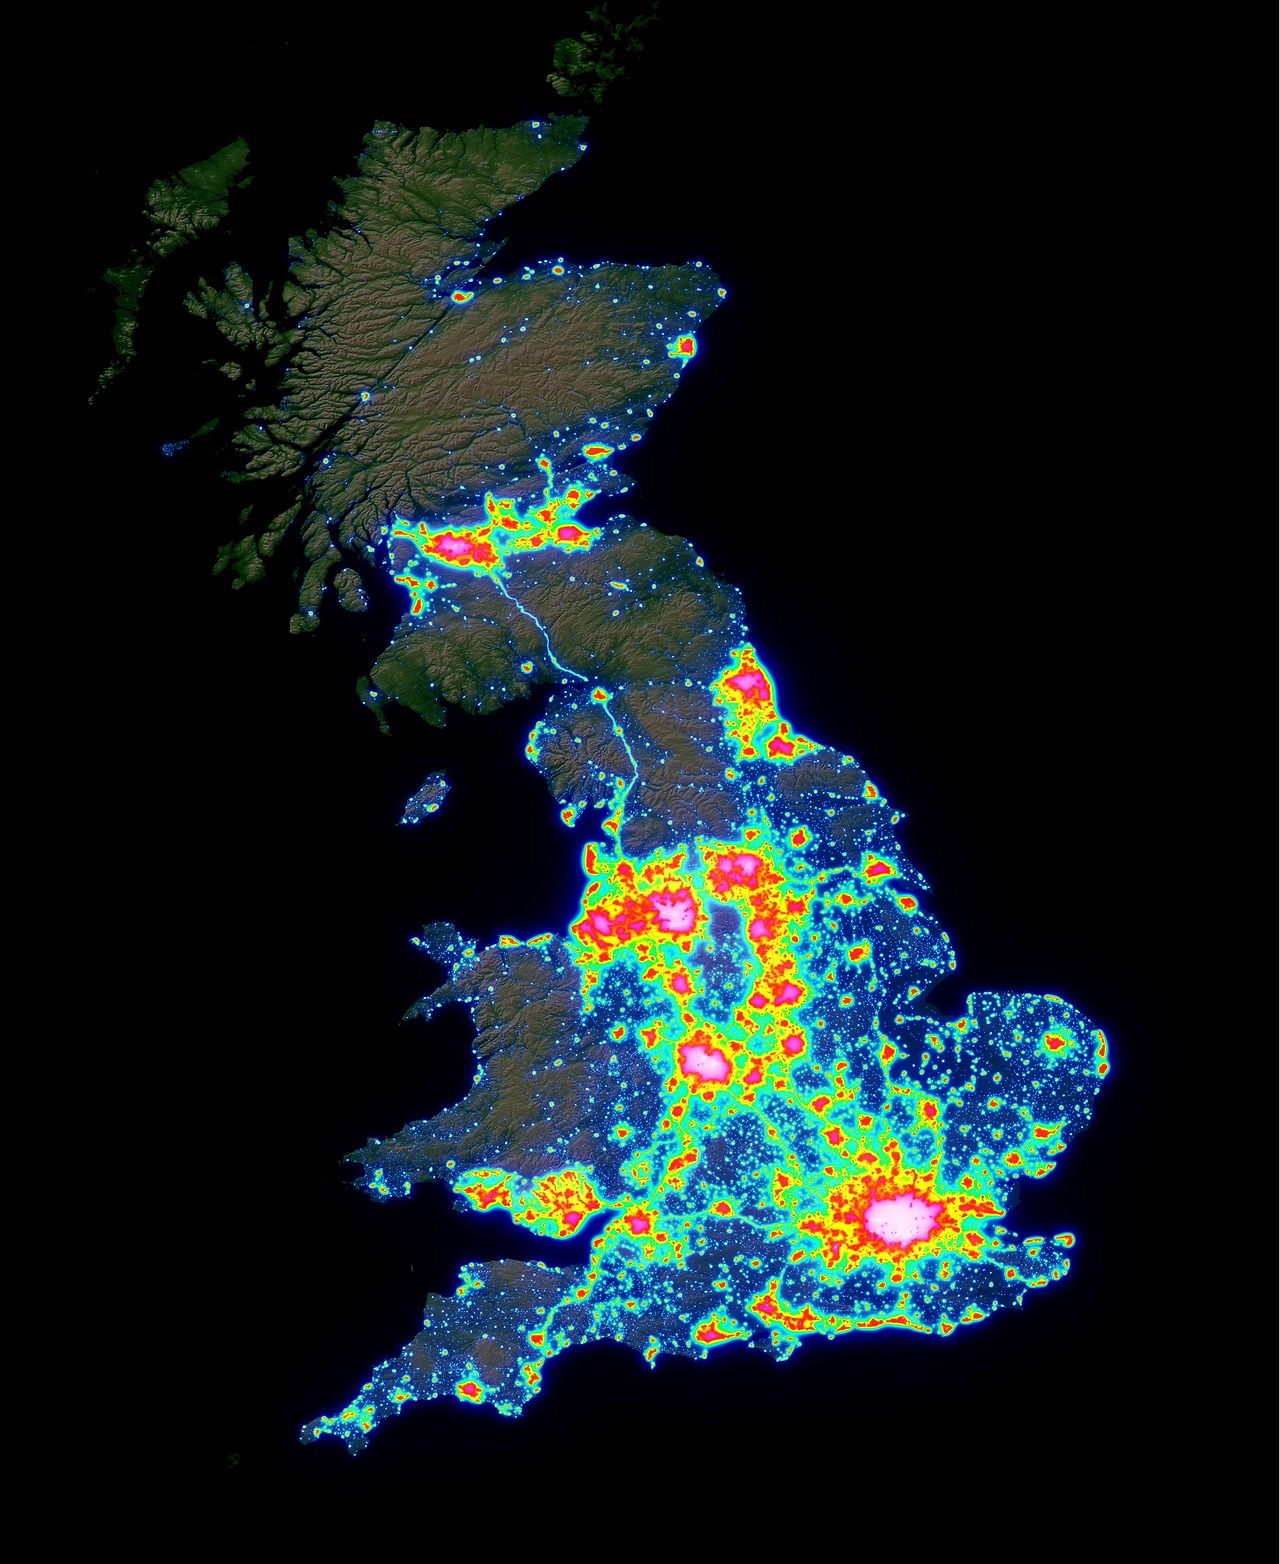 Light Pollution map of Great Britain.